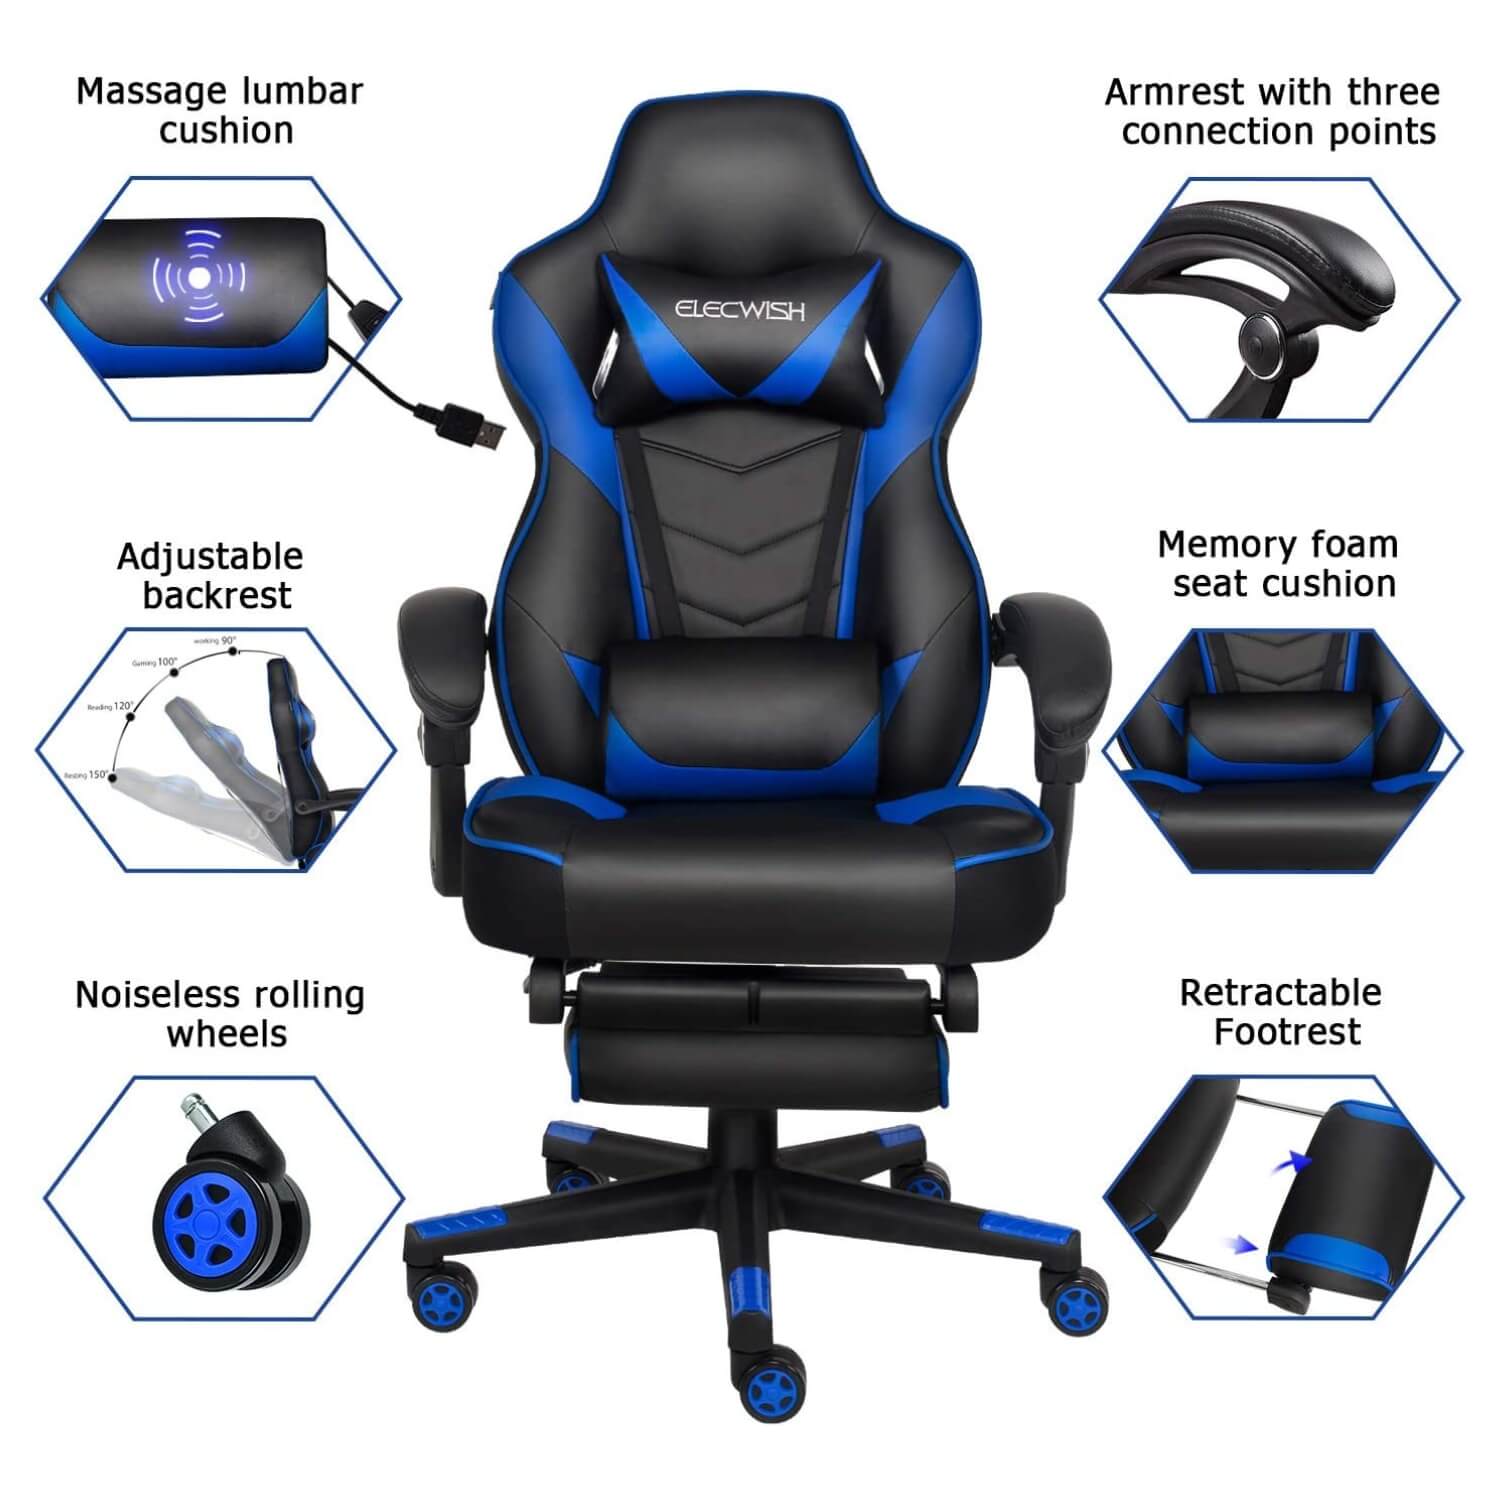 Six features of Elecwish blue massage gaming chair with footrest OC112